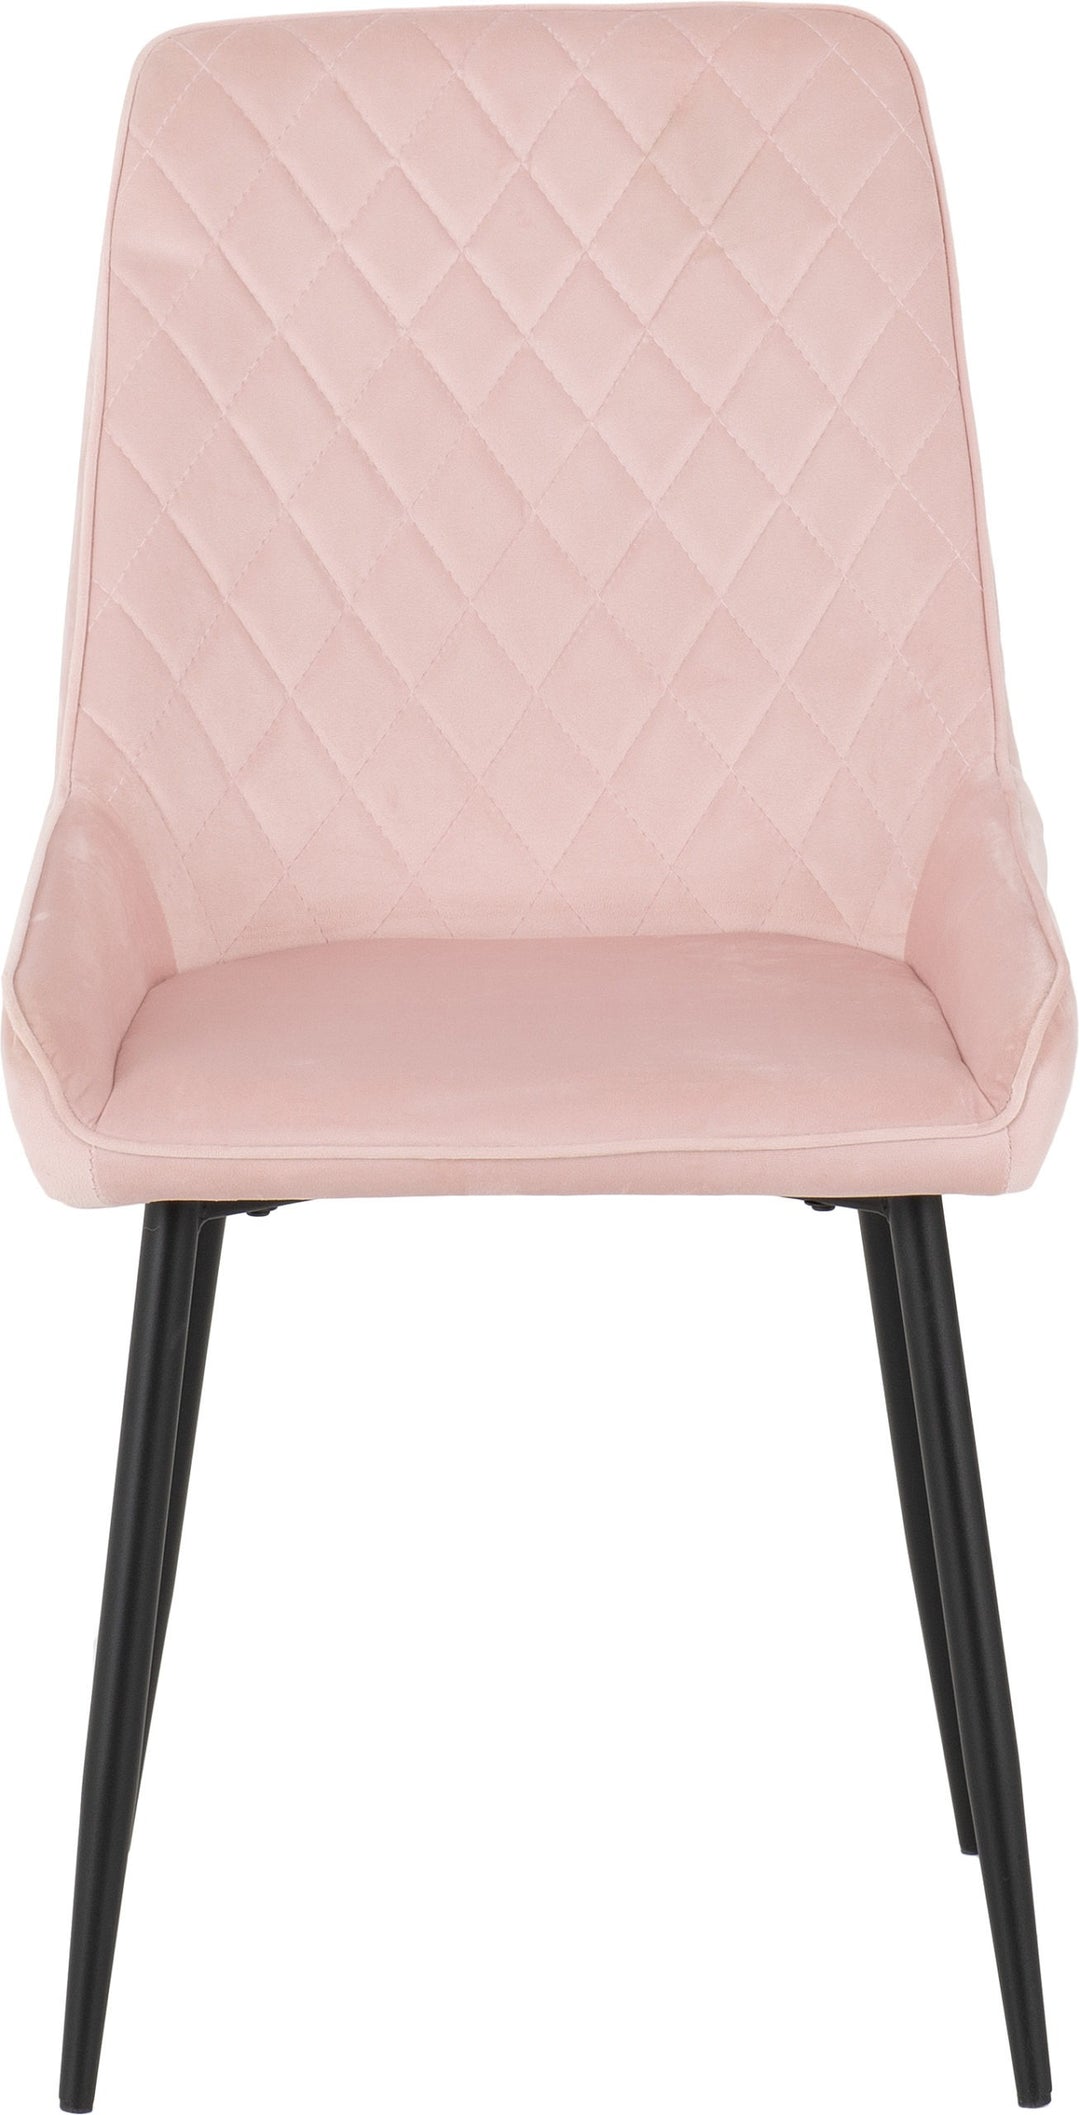 Athens Rect & Avery Dining Set (X4 Chairs) - Concrete/Baby Pink Velvet